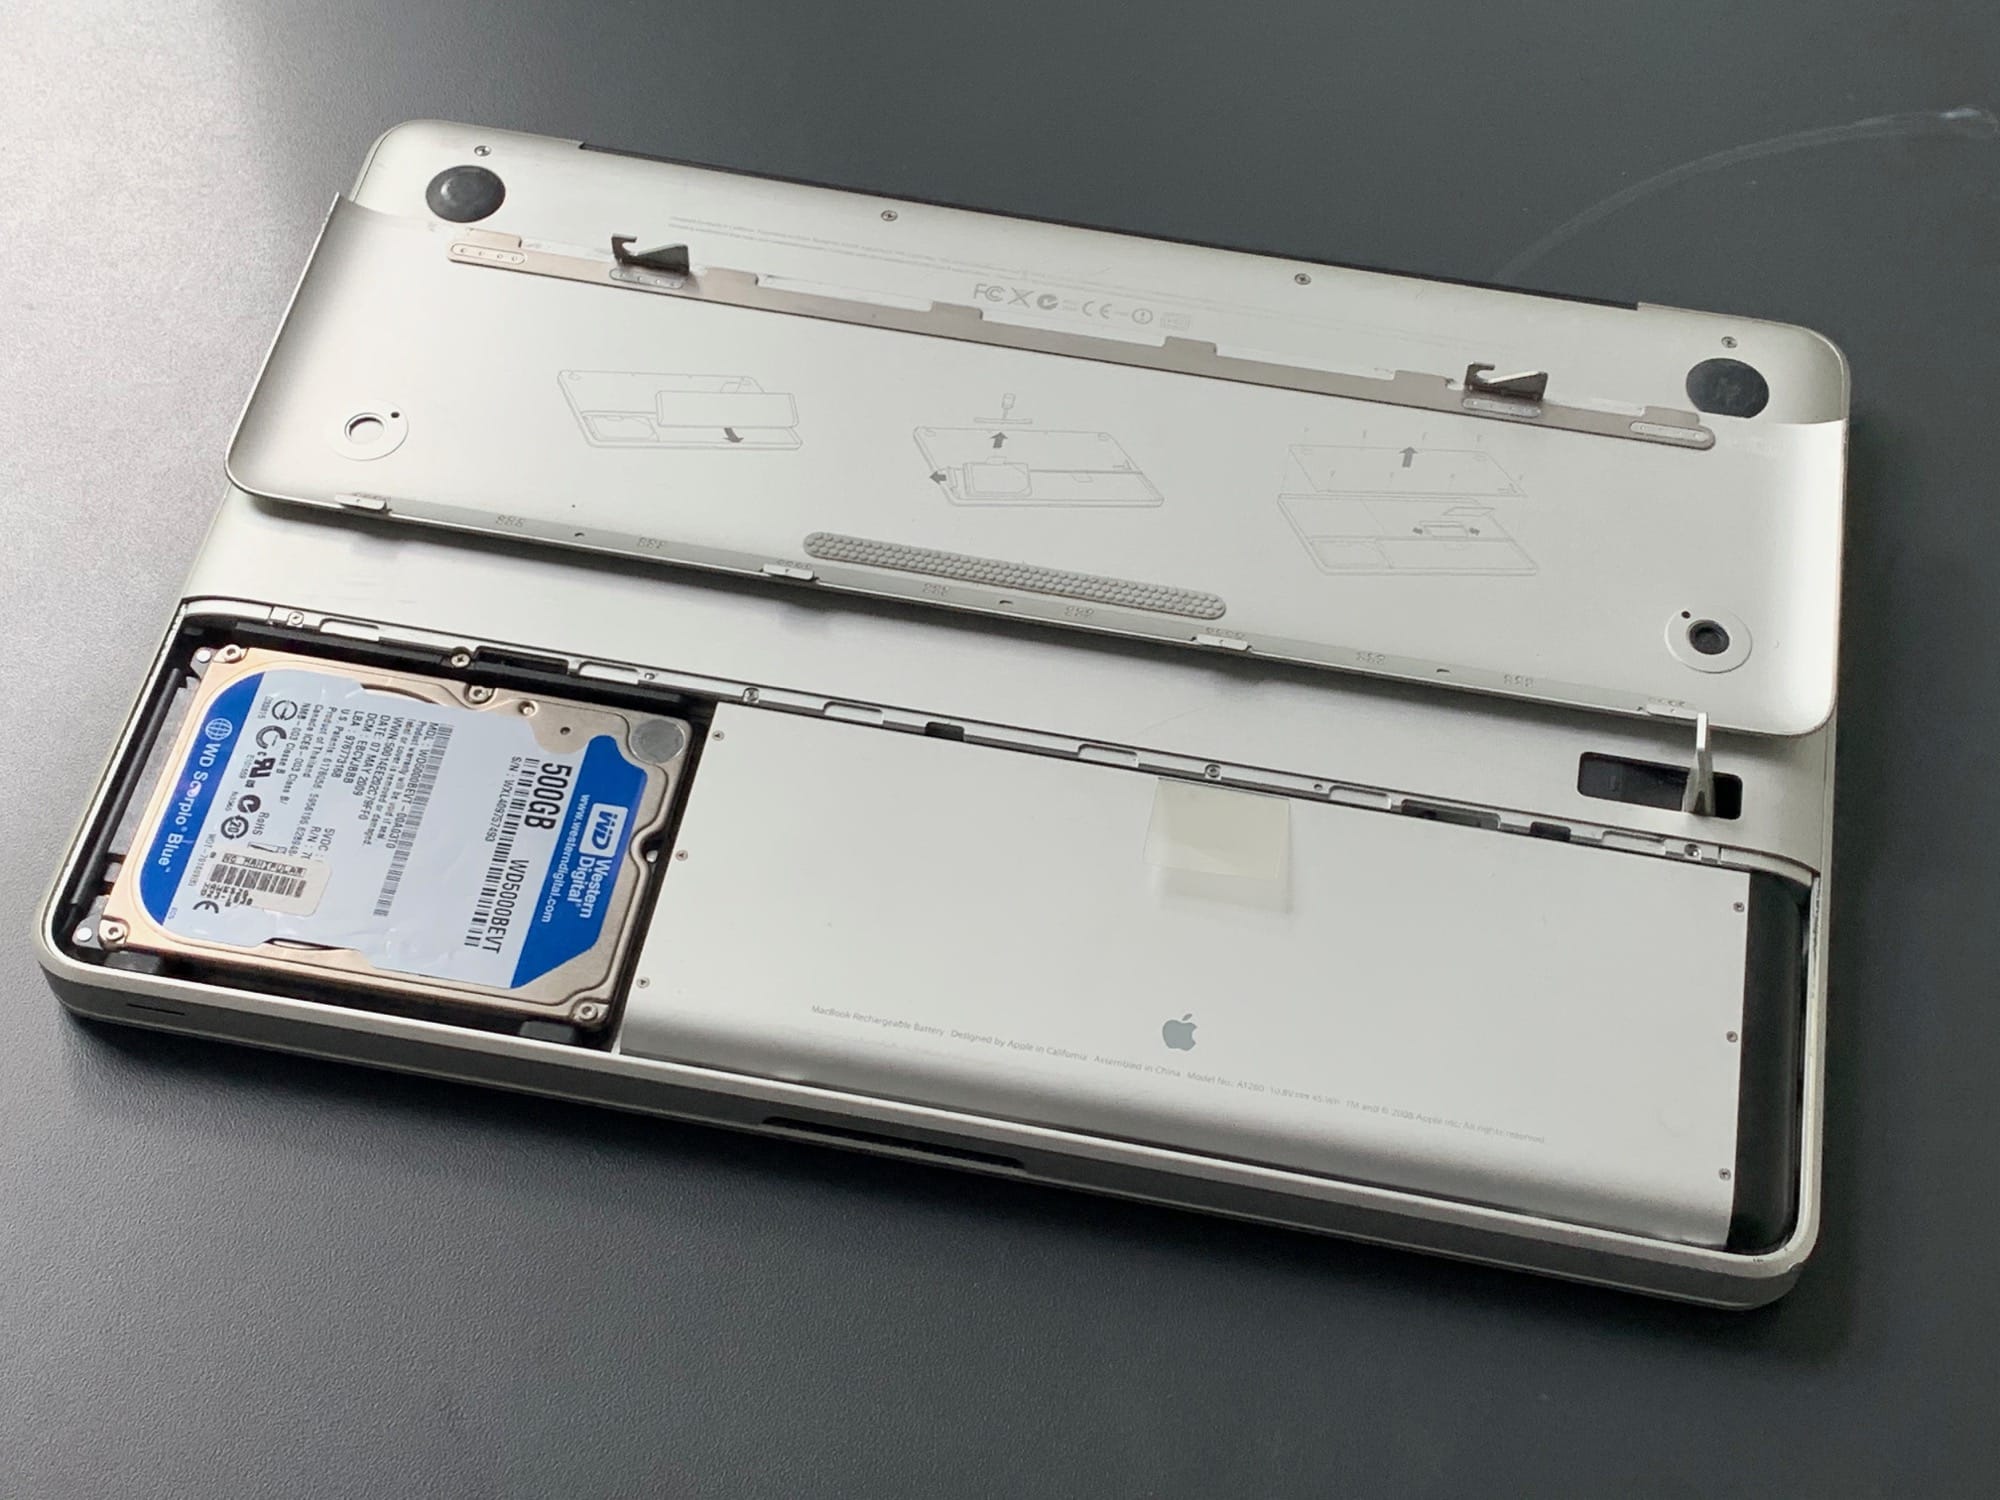 Even the hard drive is easy to replace in the 2008 unibody MacBook.